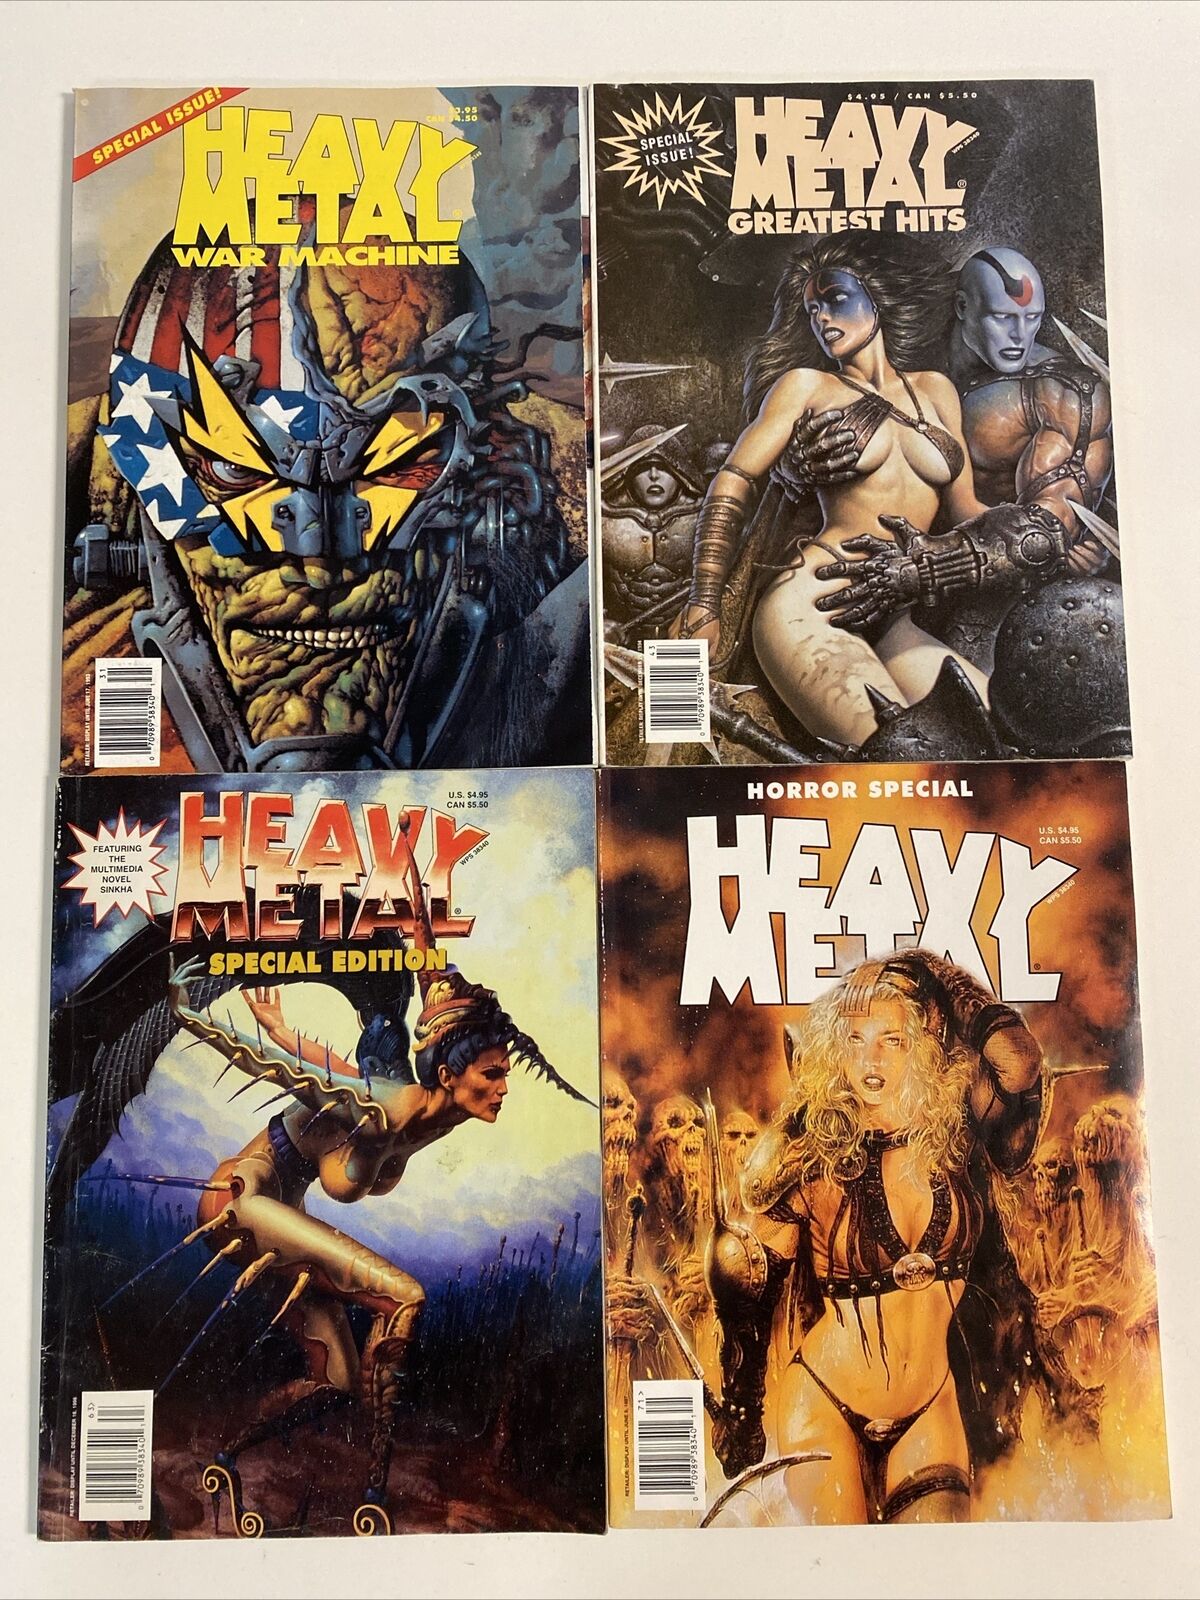 HEAVY METAL magazine 4 issue lot Horror Special, War Machine, Greatest Hits 1993